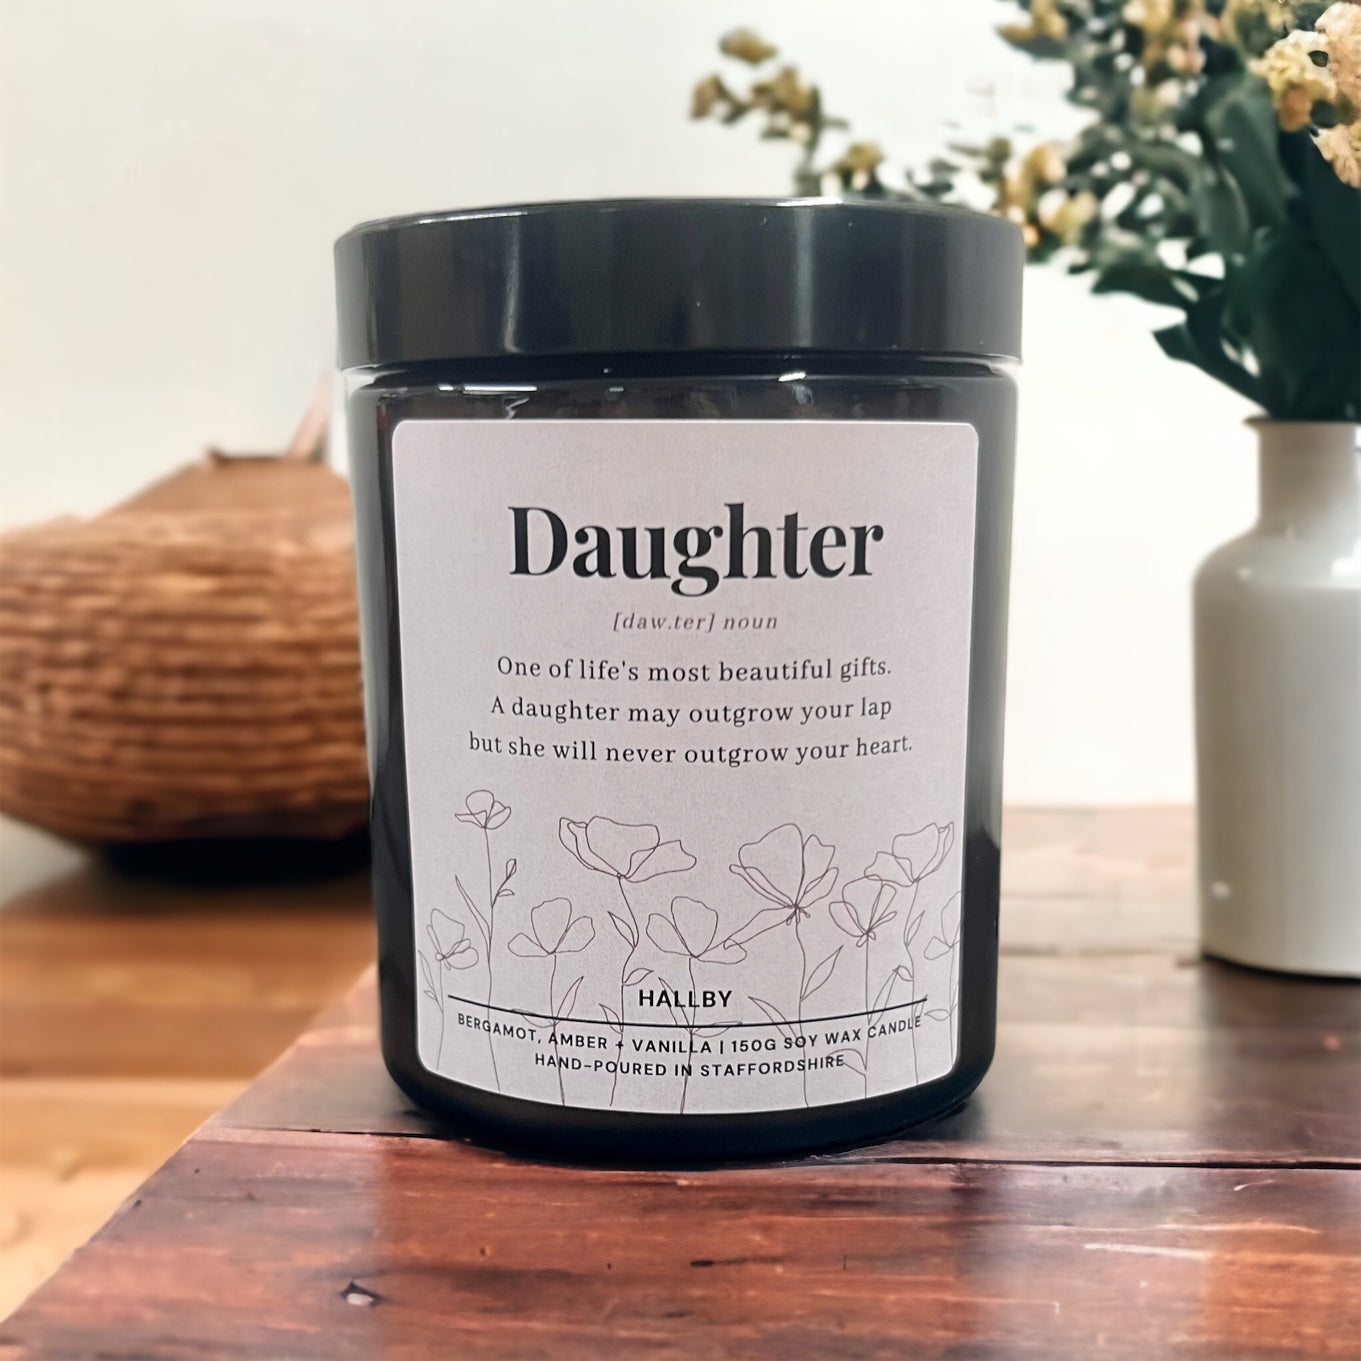 Daughter: Noun scented gifting candle